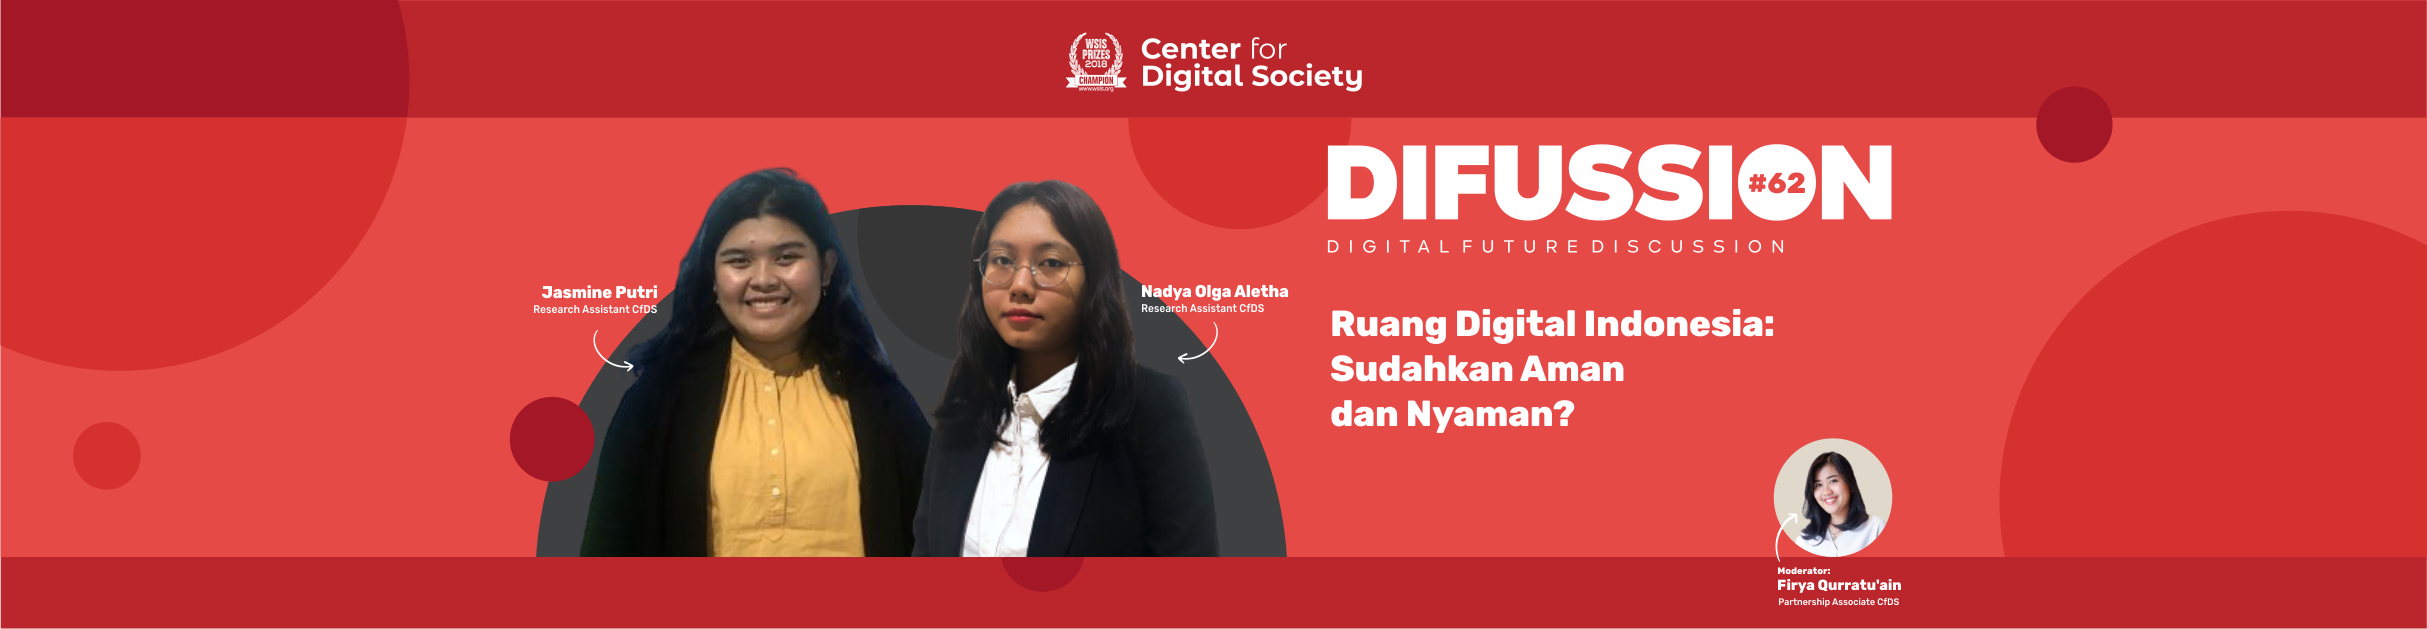 [PRESS RELEASE] Digital Space in Indonesia: Has It been Safe and Comfortable? | #DIFUSSION62